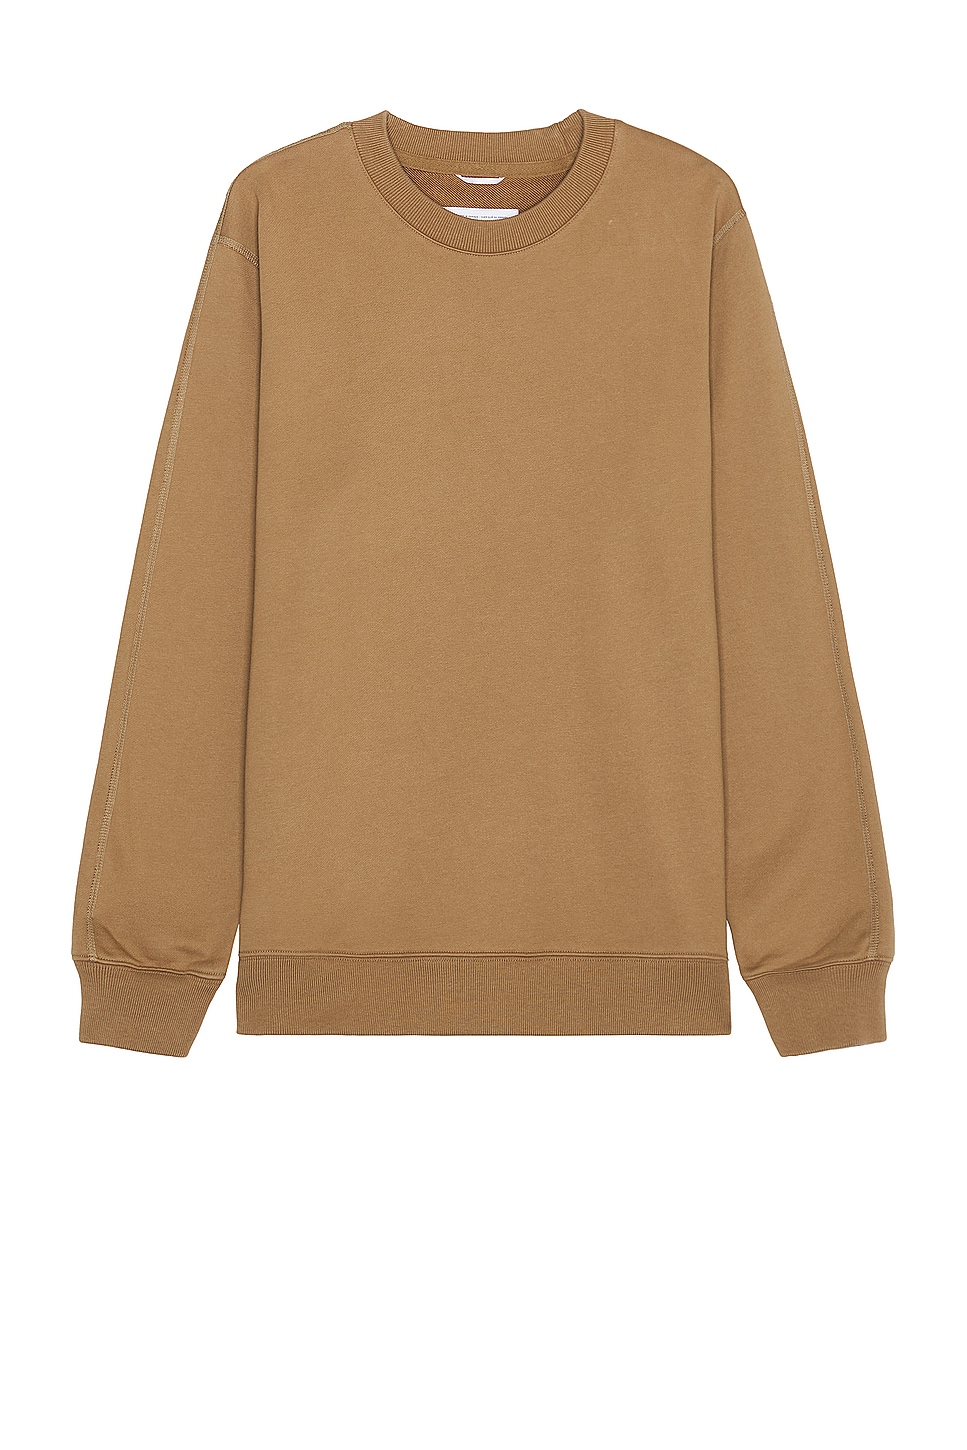 Image 1 of Reigning Champ Midweight Terry Classic Crewneck in Clay